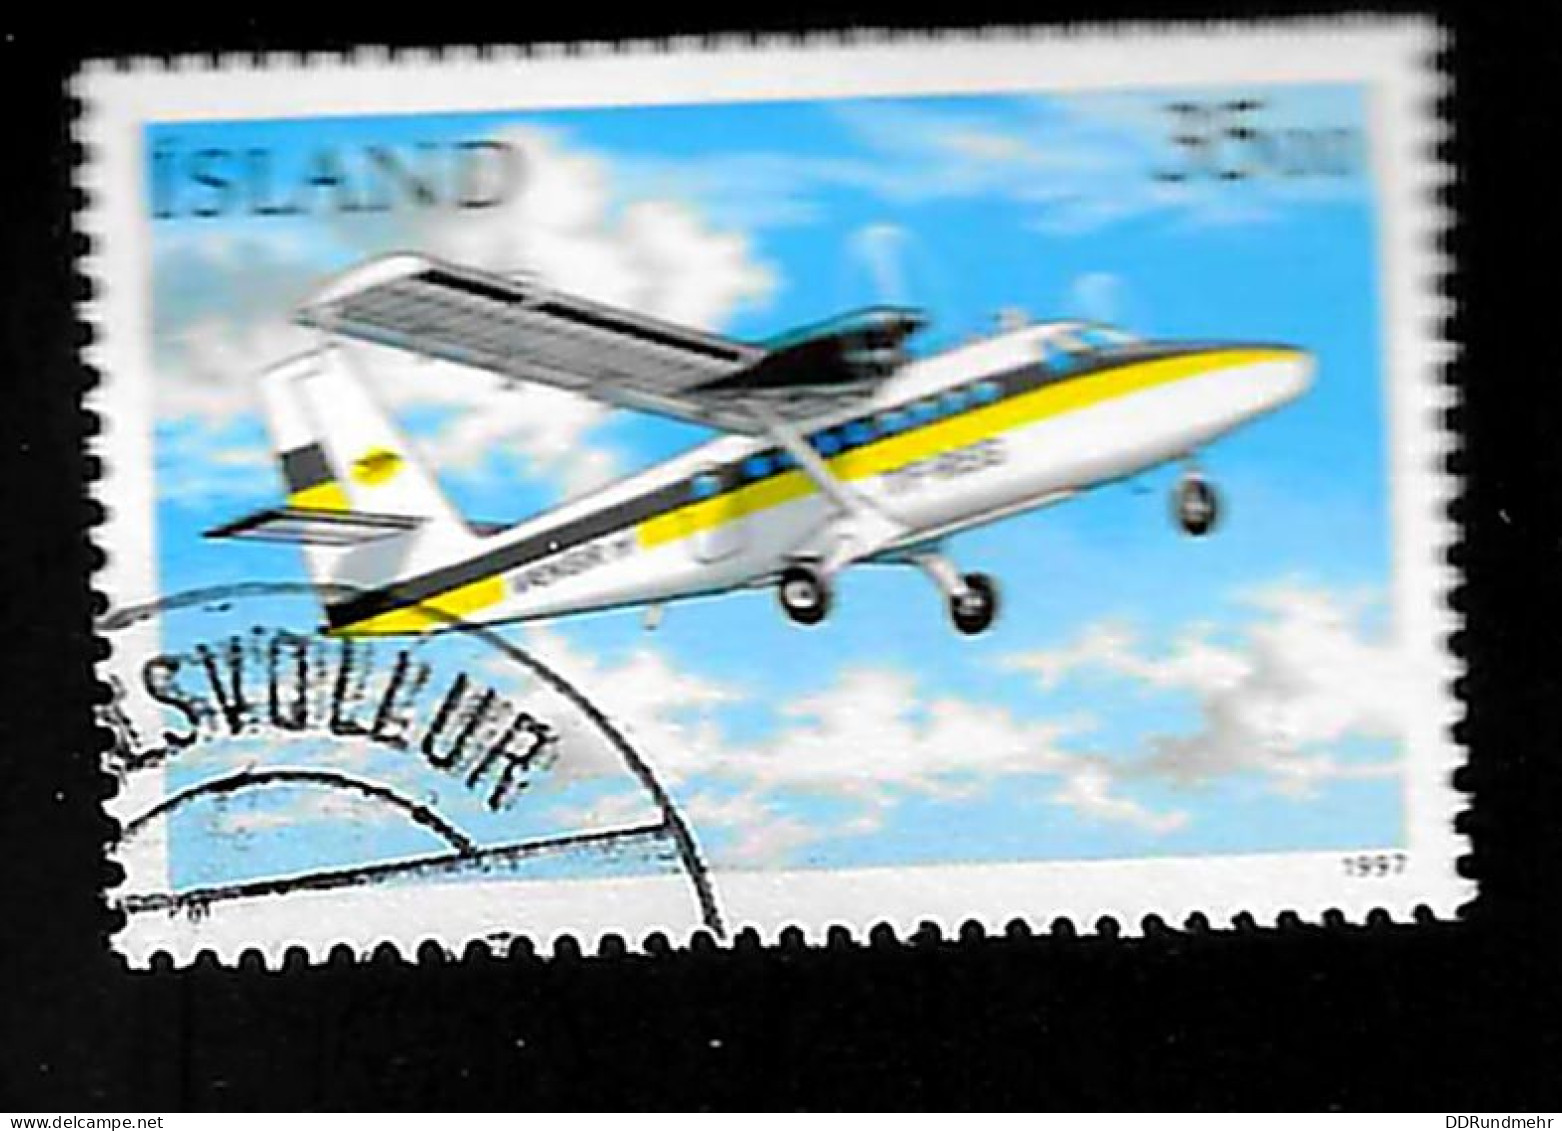 1997 Postal Aircrafts Michel IS 869 Stamp Number IS 841 Stanley Gibbons IS 882 AFA IS 854 Used - Used Stamps